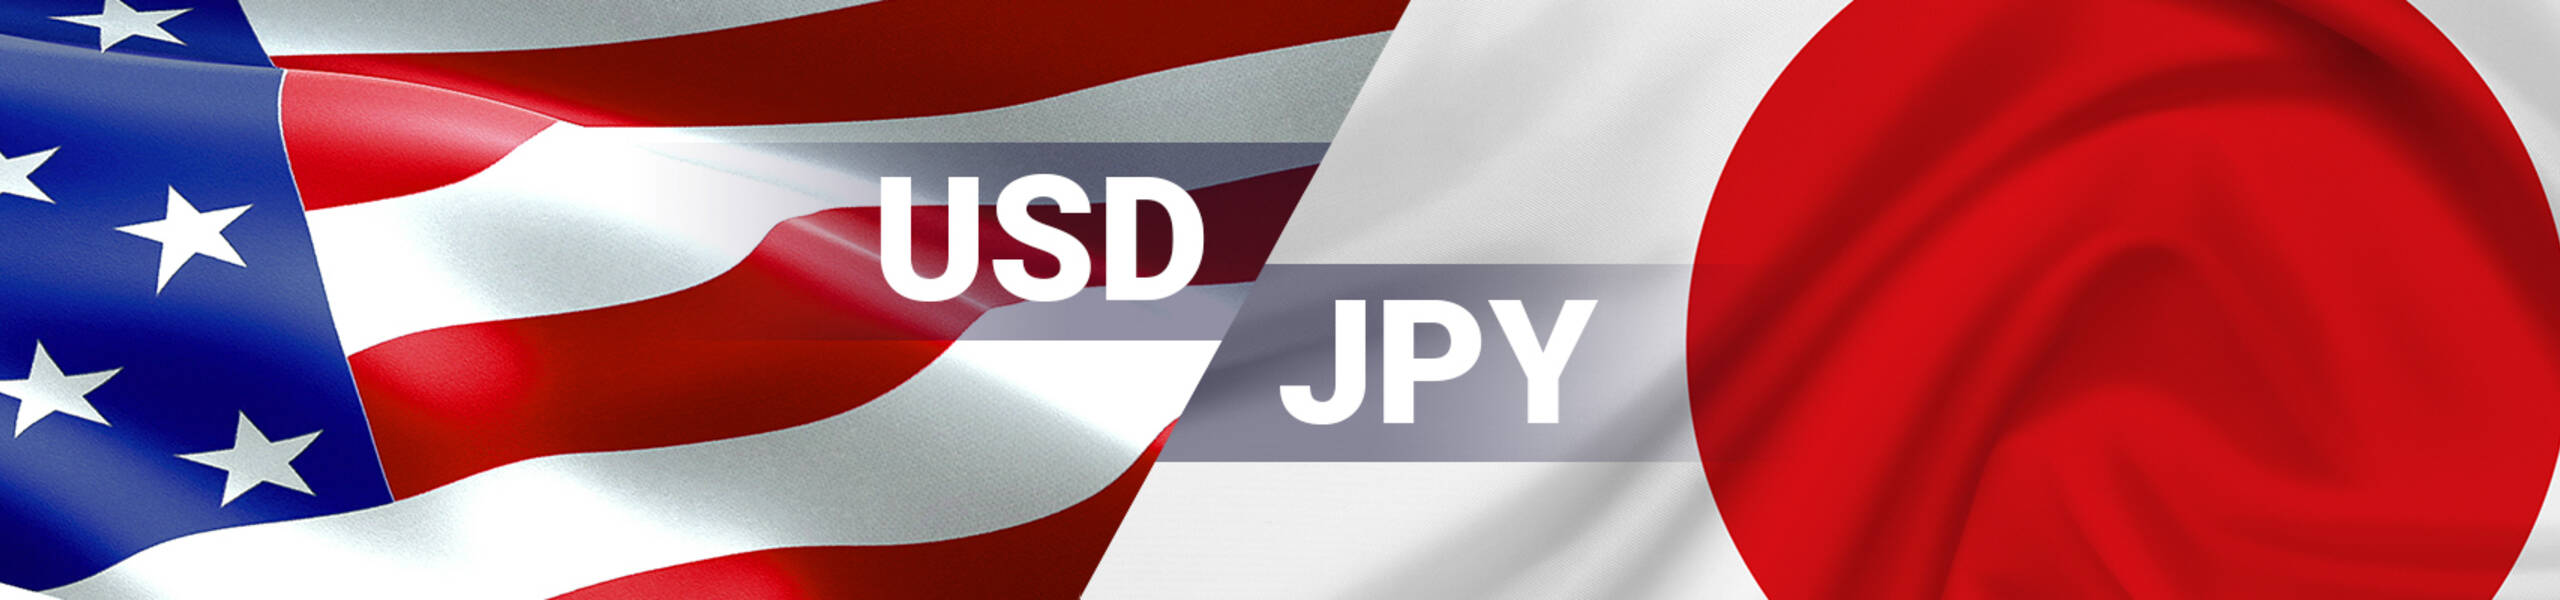 USD/JPY: the Dollar going higher